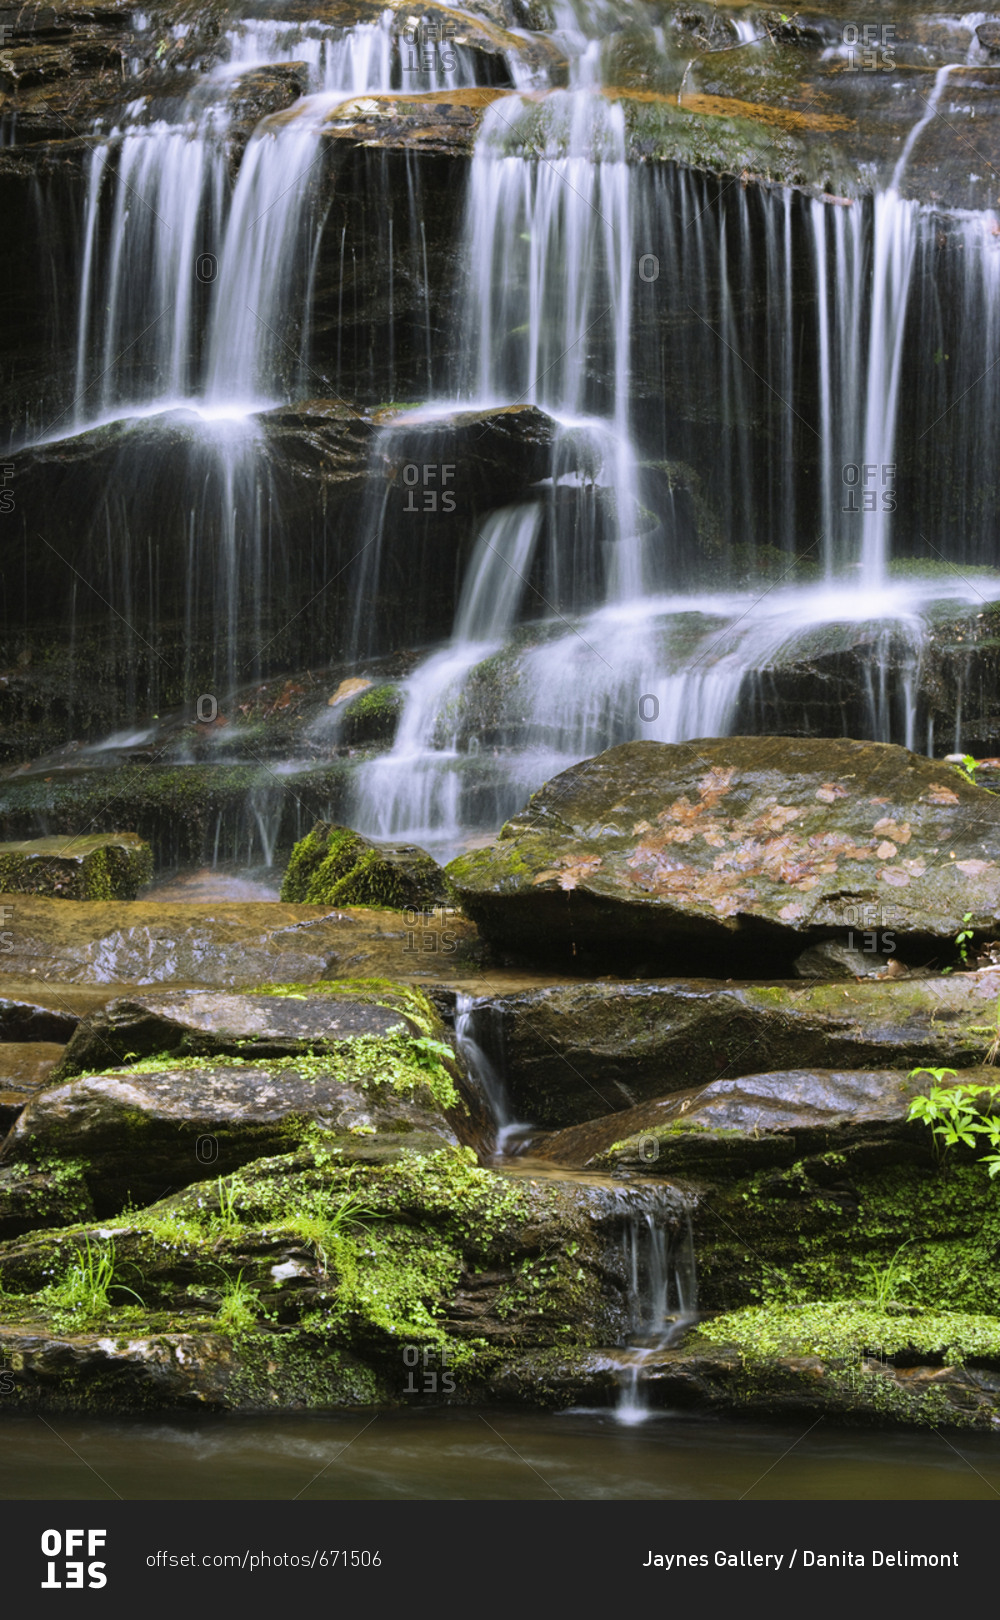 USA, Tennessee, Great Smoky Mountains National Park, Waterfall